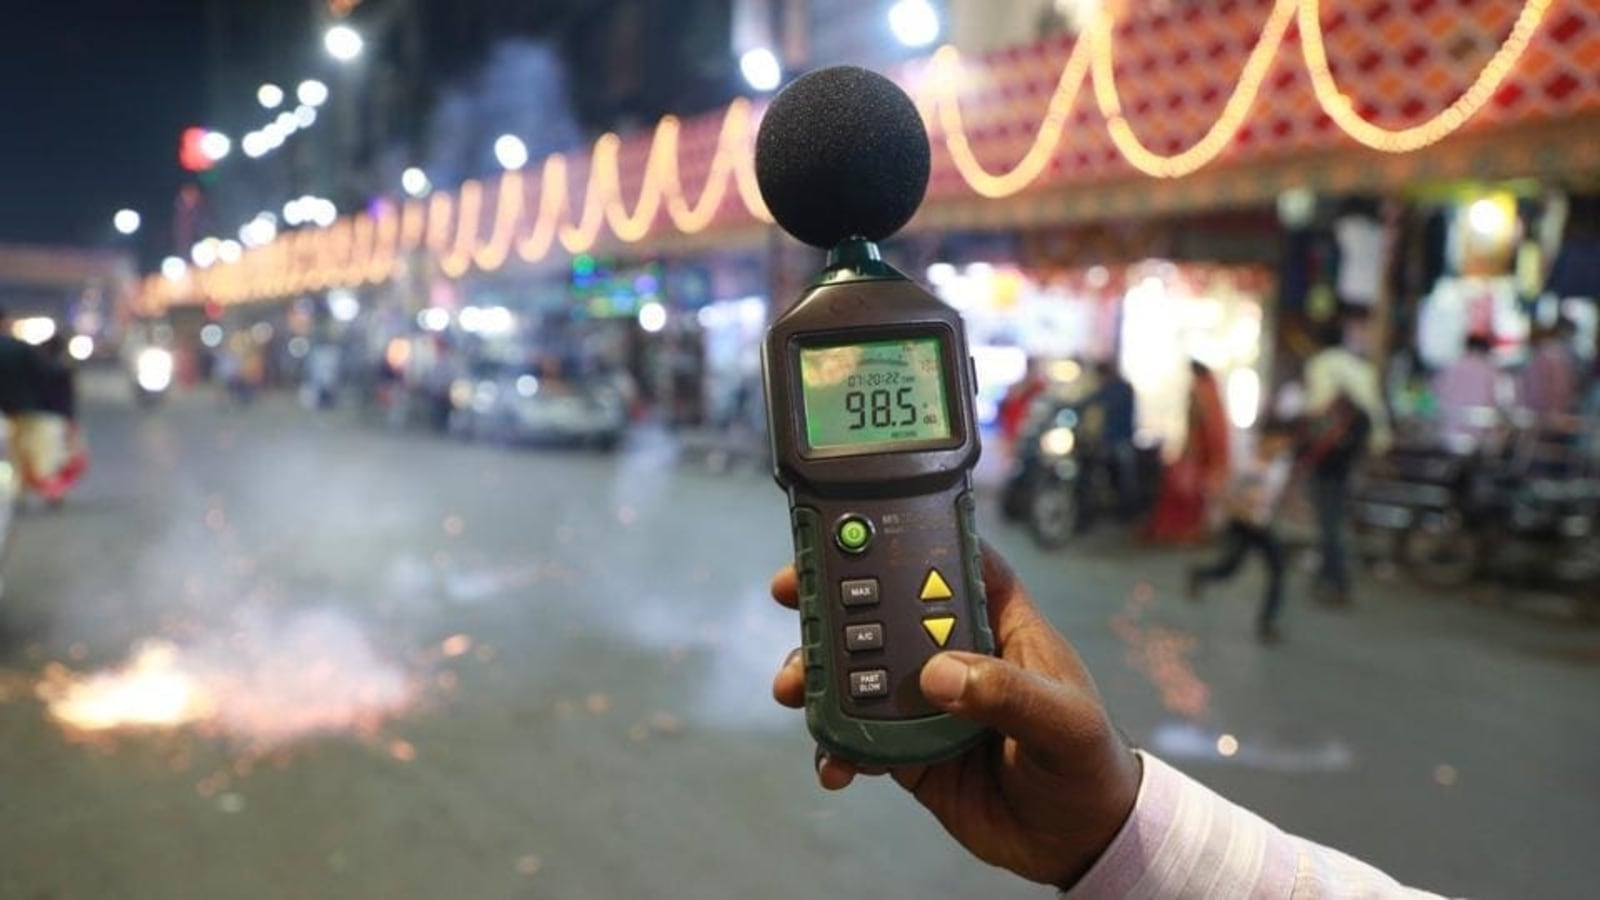 Sound check: This city in UP is world's 2nd noisiest city, Delhi too on UN list